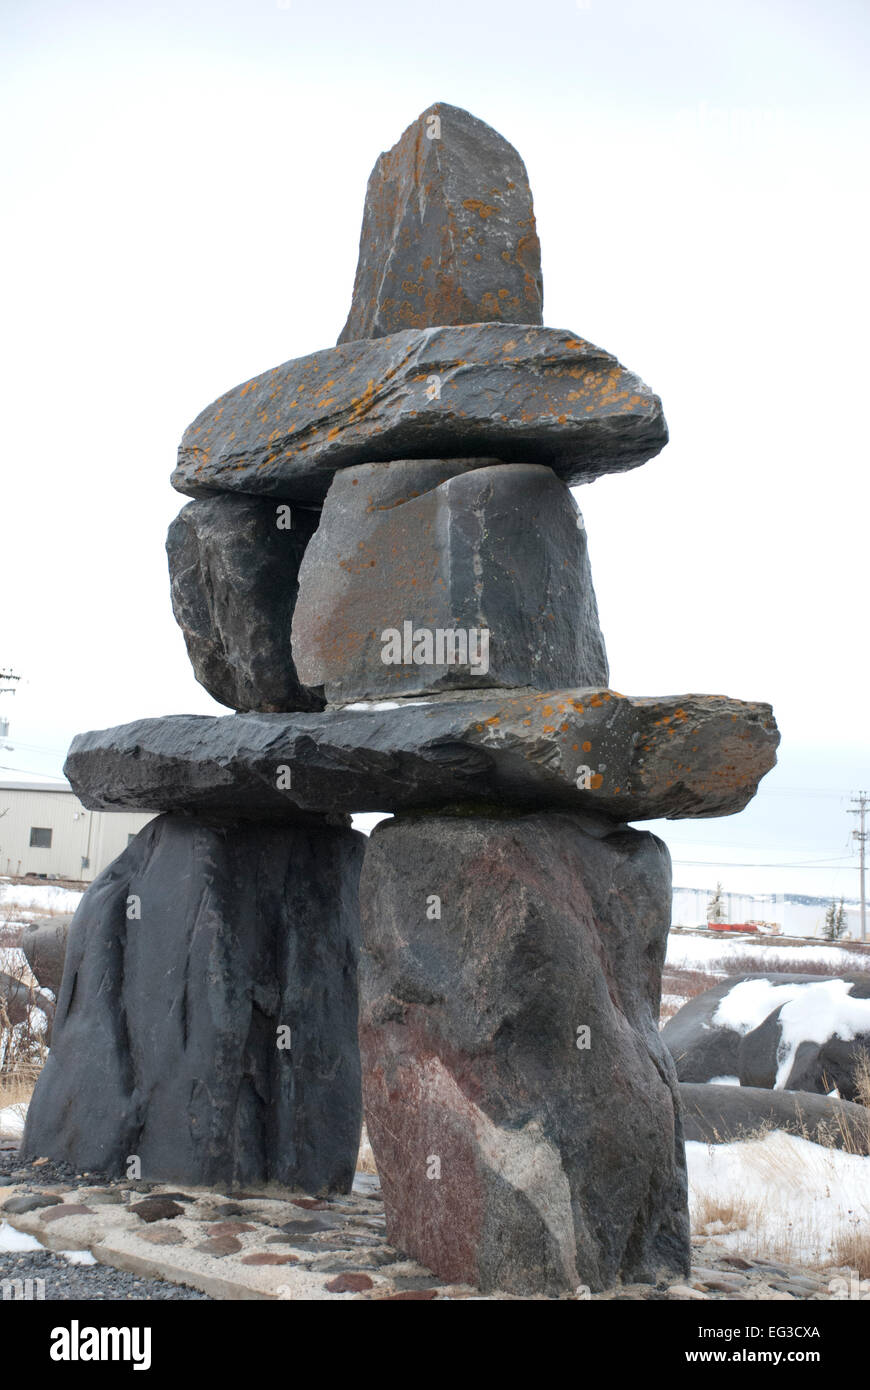 Inukshuk, a stone landmark or cairn built and used by the Inuit, Inupiat, Kalaallit, Yupik, and other peoples of the Arctic Stock Photo